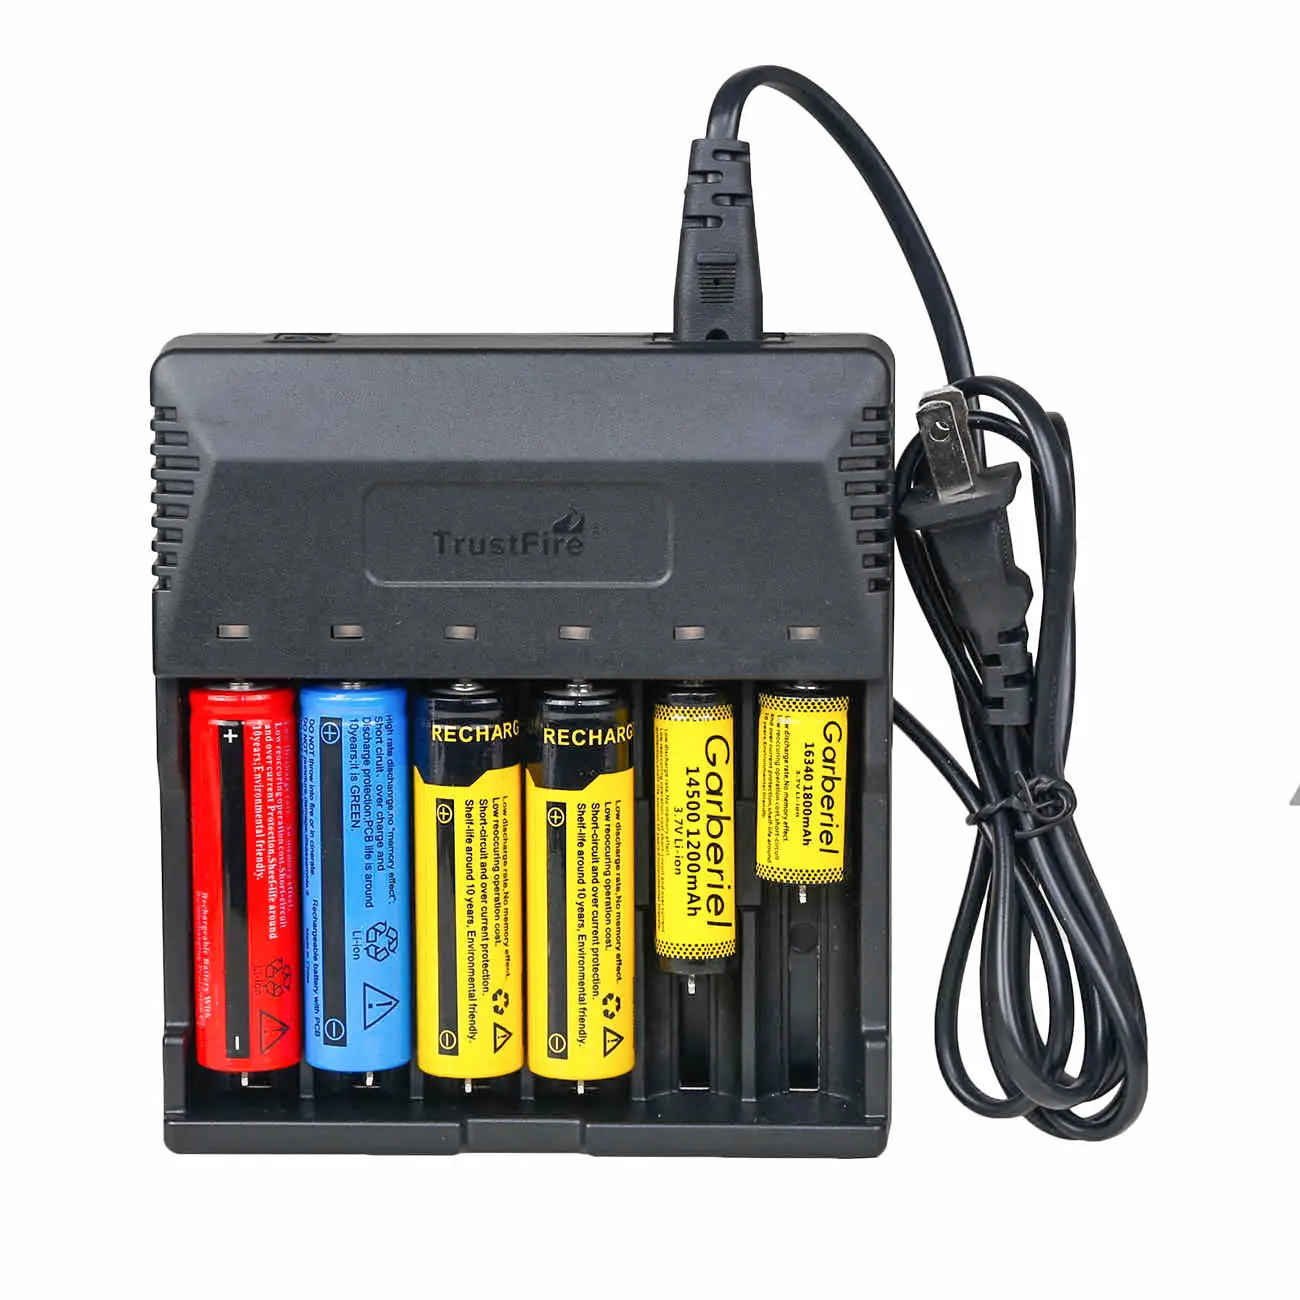 6 slot battery chargers Li-ion battery charger Ni-MH battery charger for 18650 18500 18350 17670 16340 14650 14500 10440 AA AAA